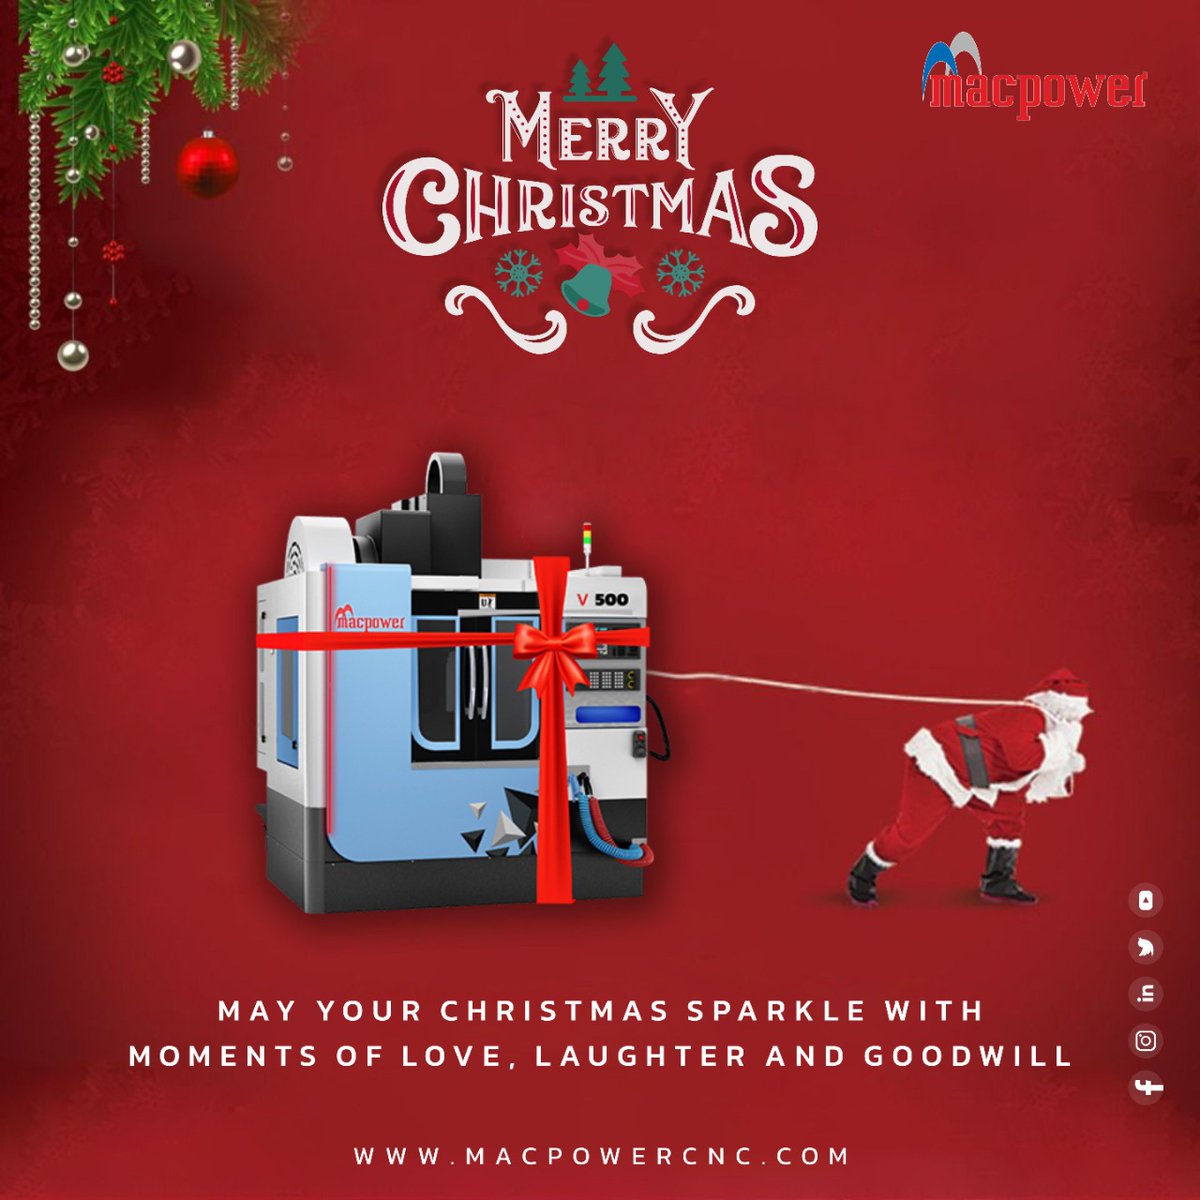 MAY YOUR CHRISTMAS SPARKLE WITH
MOMENTS OF LOVE, LAUGHTER AND GOODWILL
MERRY CHRISTMAS 
 #macpowercnc #macpowercncltd #macpowercncmachine #indian #vmcmachine #gujarat #MACHINETOOLS #indiamart #machine #VMC #cnc #macpower #merrychristmas#merrychristmas2023